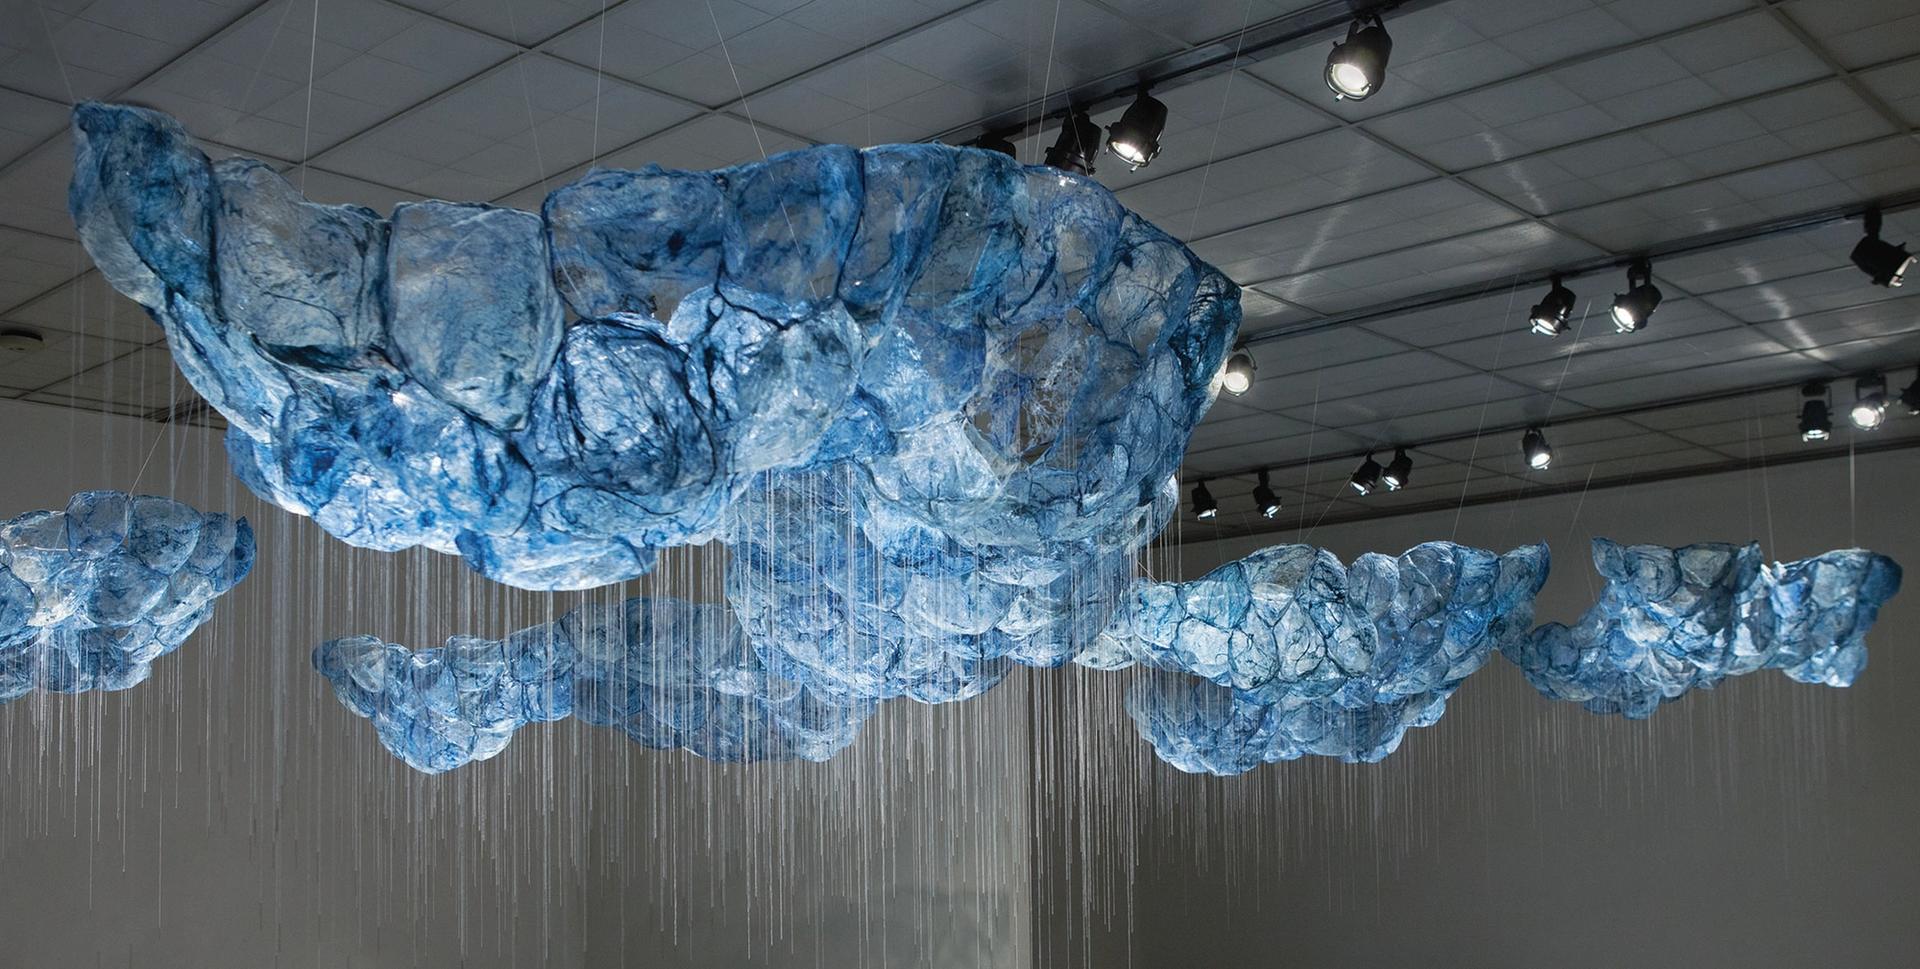 Beili Liu’s installation After All/Mending the Sky (2017) will open a contemporary art show at the New Orleans Museum of Art that responds to the coronavirus pandemic © Beili Liu Studio